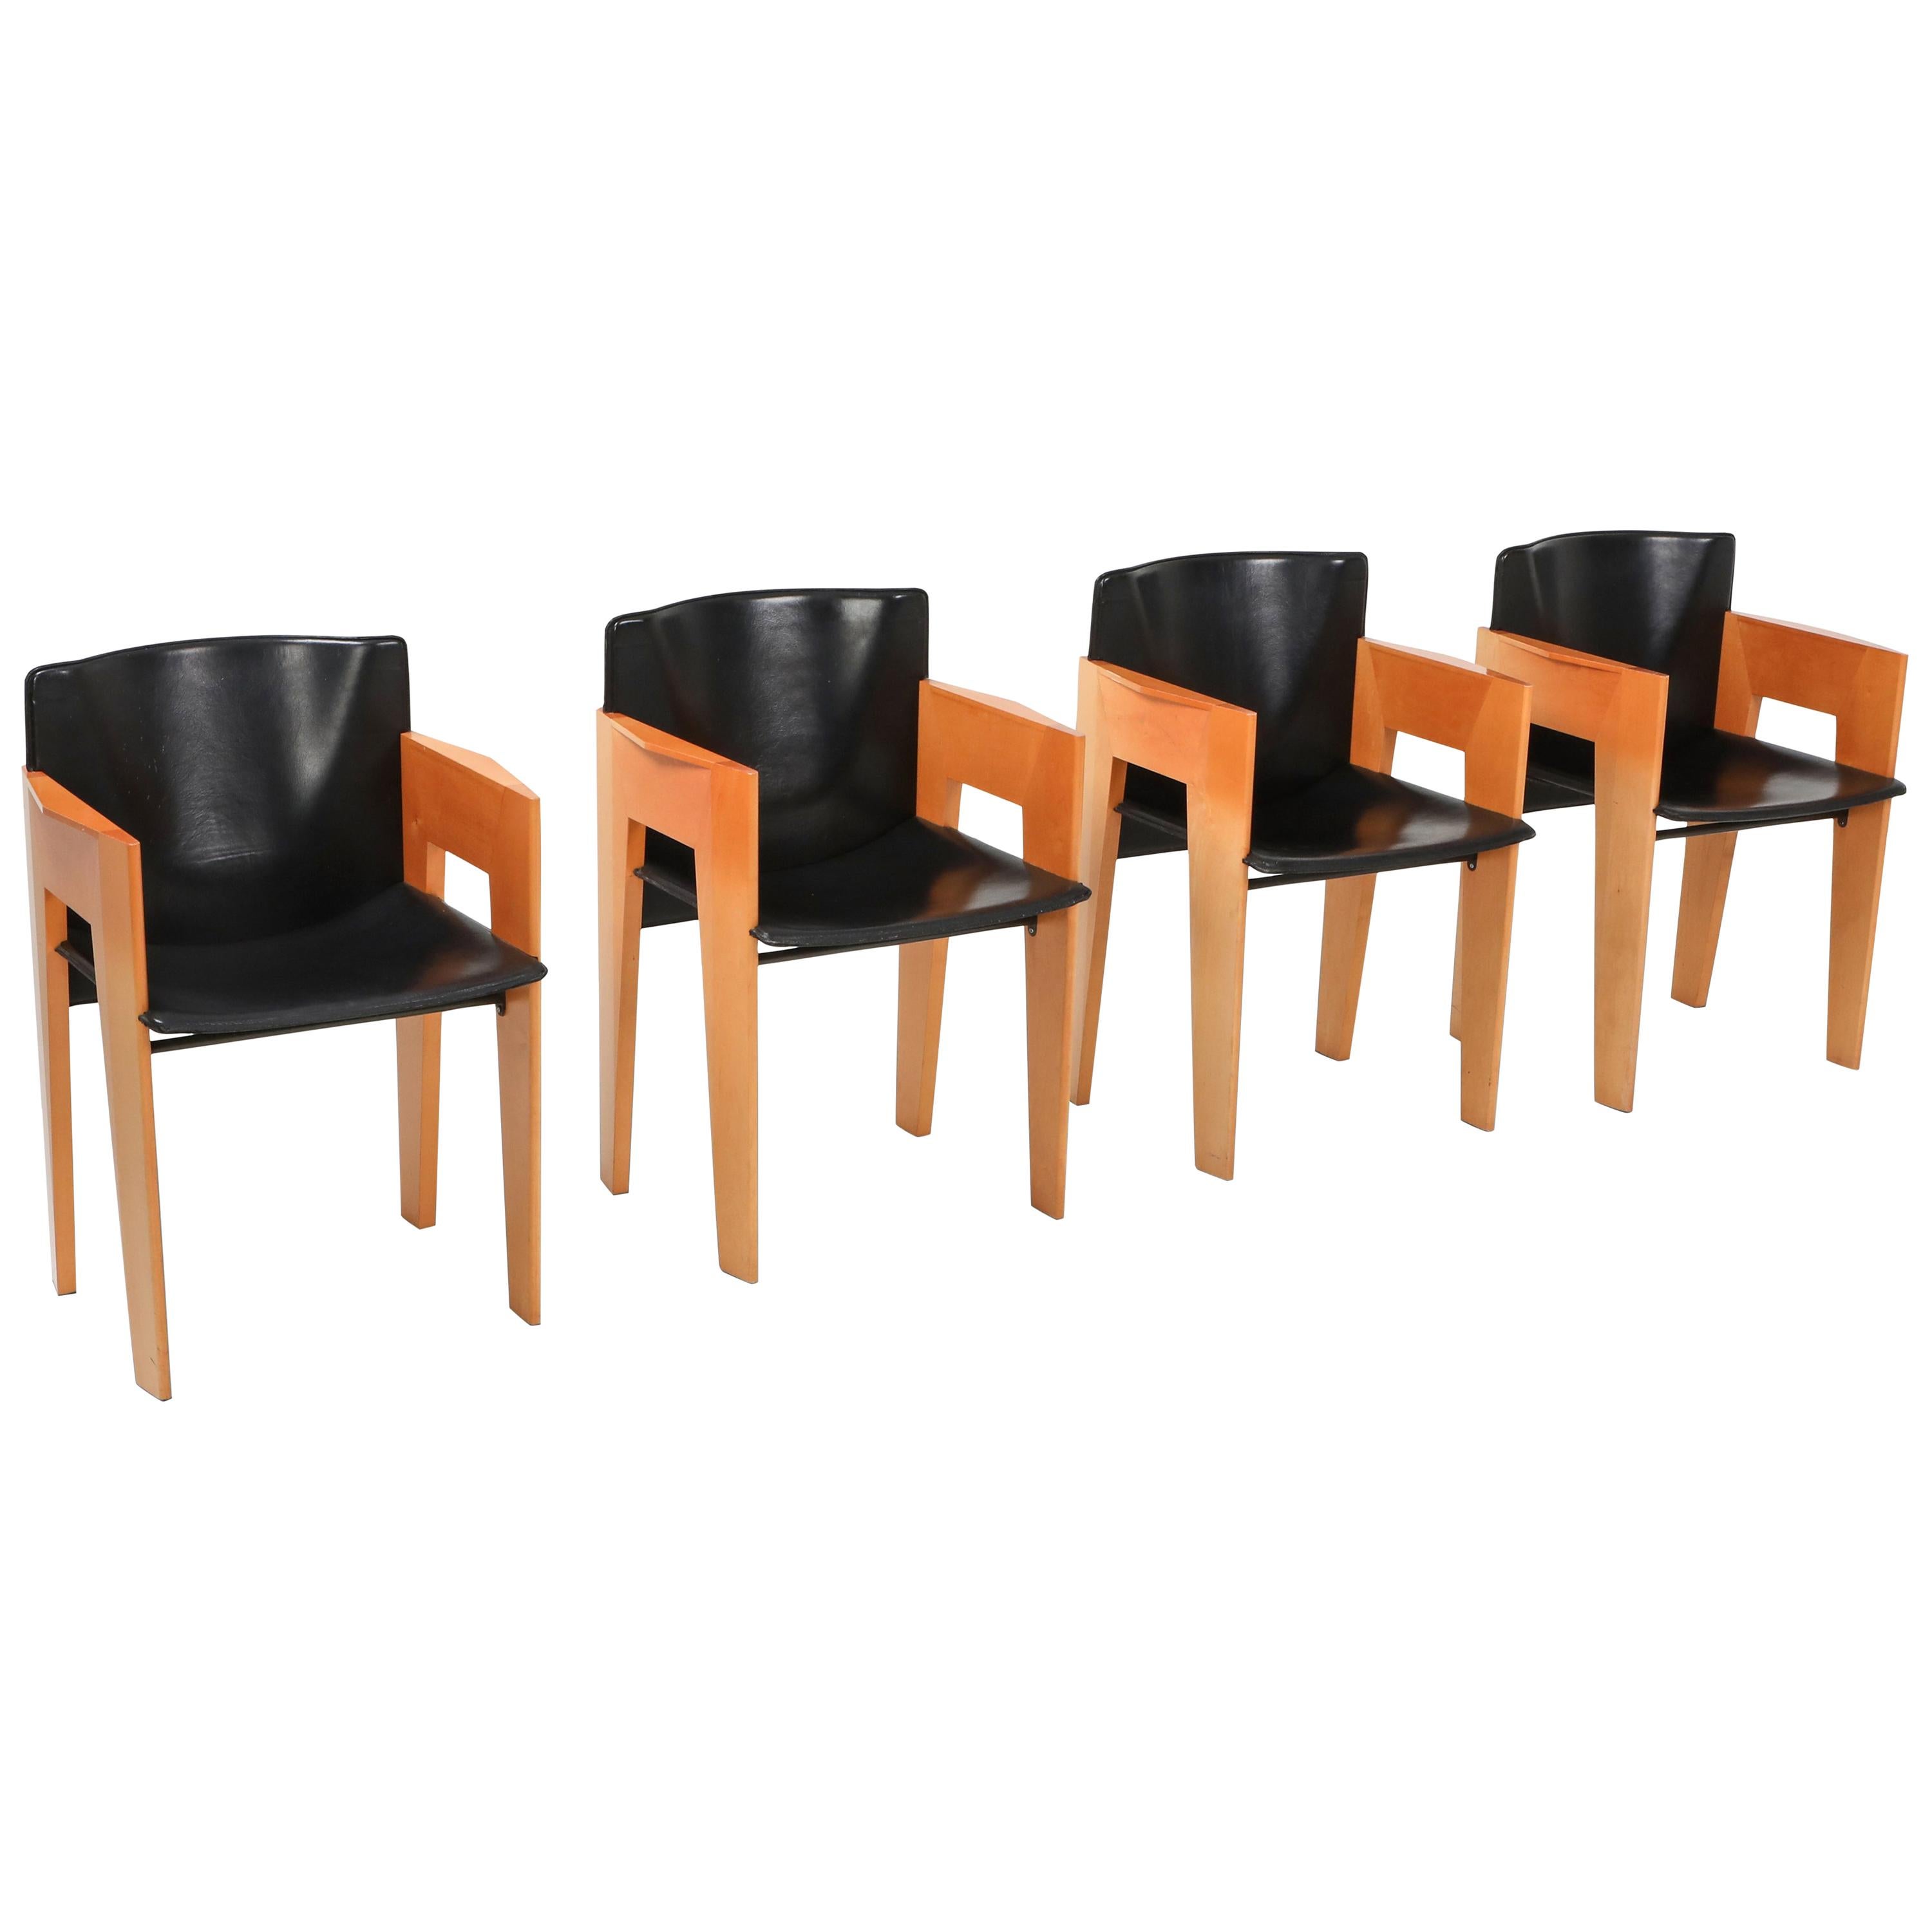 Arco Sculptural Leather and Wood Chairs